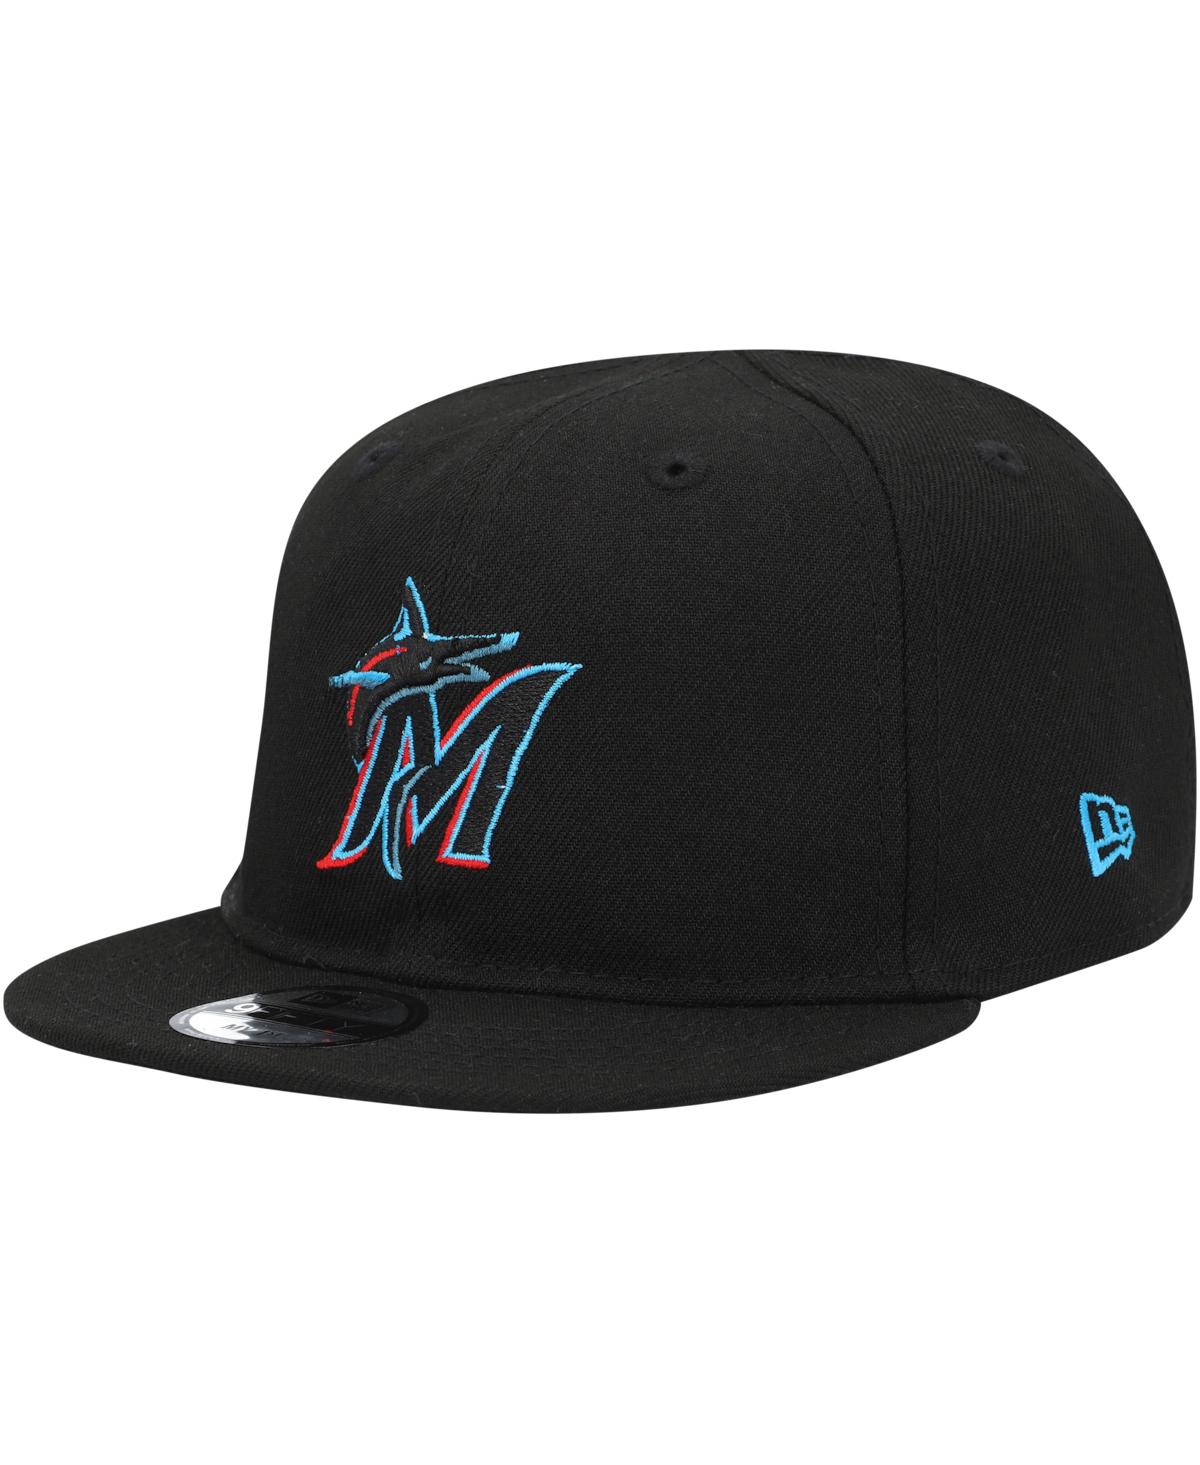 New Era Babies' Infant Boys And Girls  Black Miami Marlins My First 9fifty Adjustable Hat